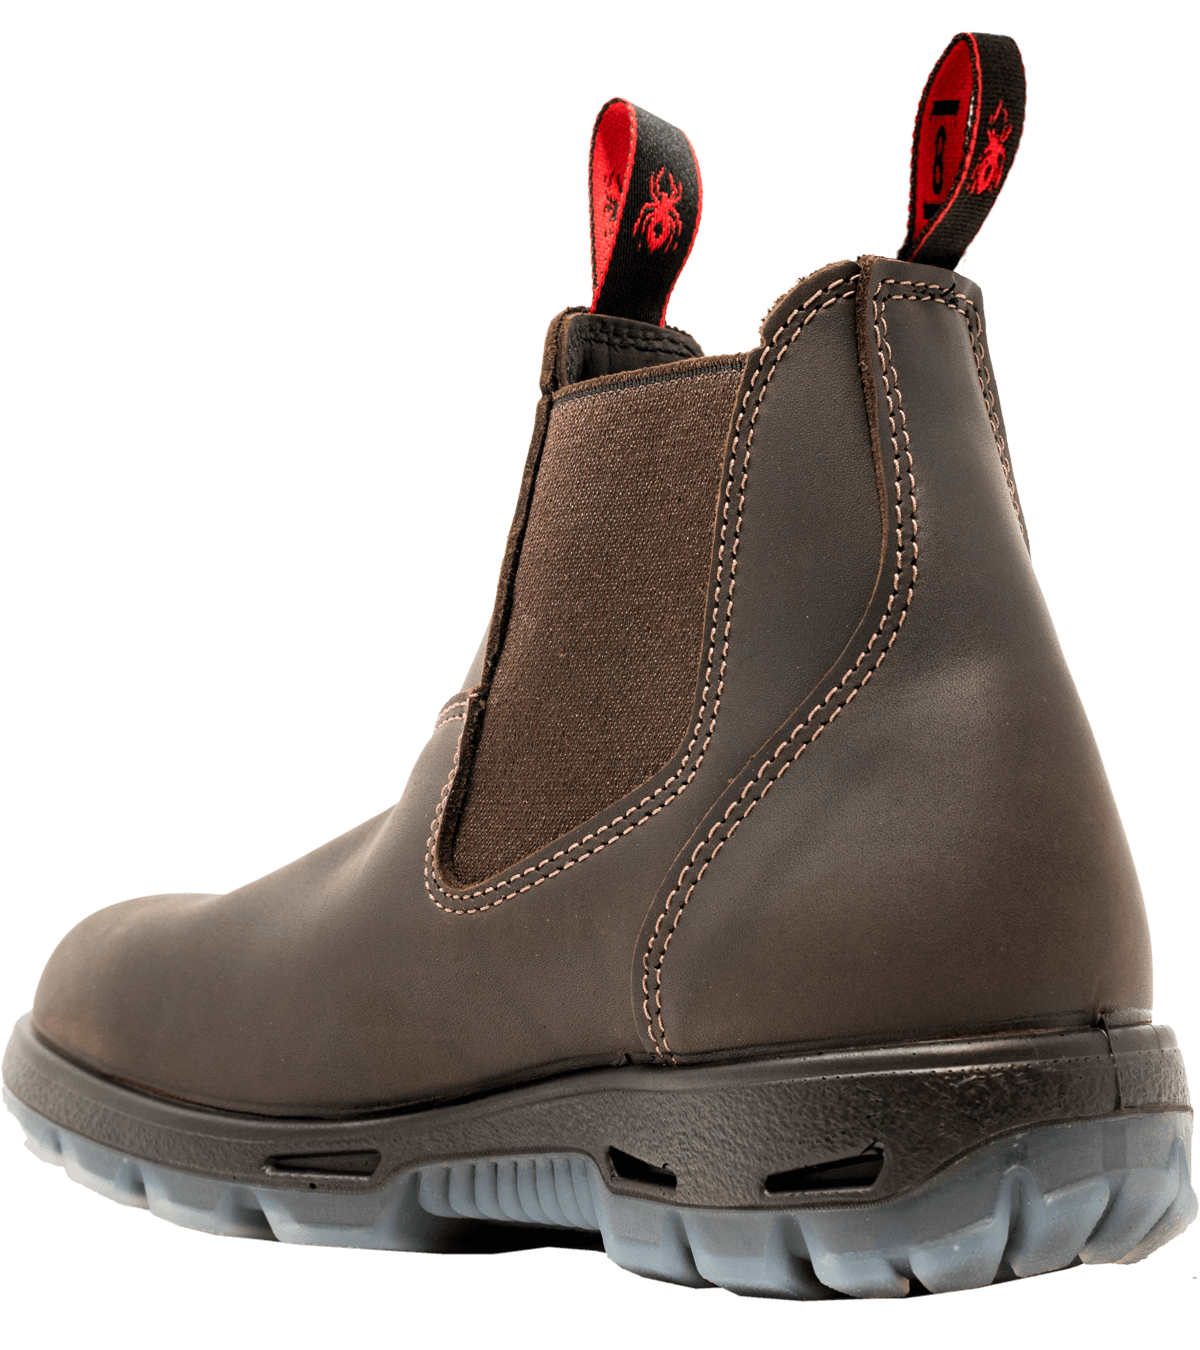 redback great barrier boots